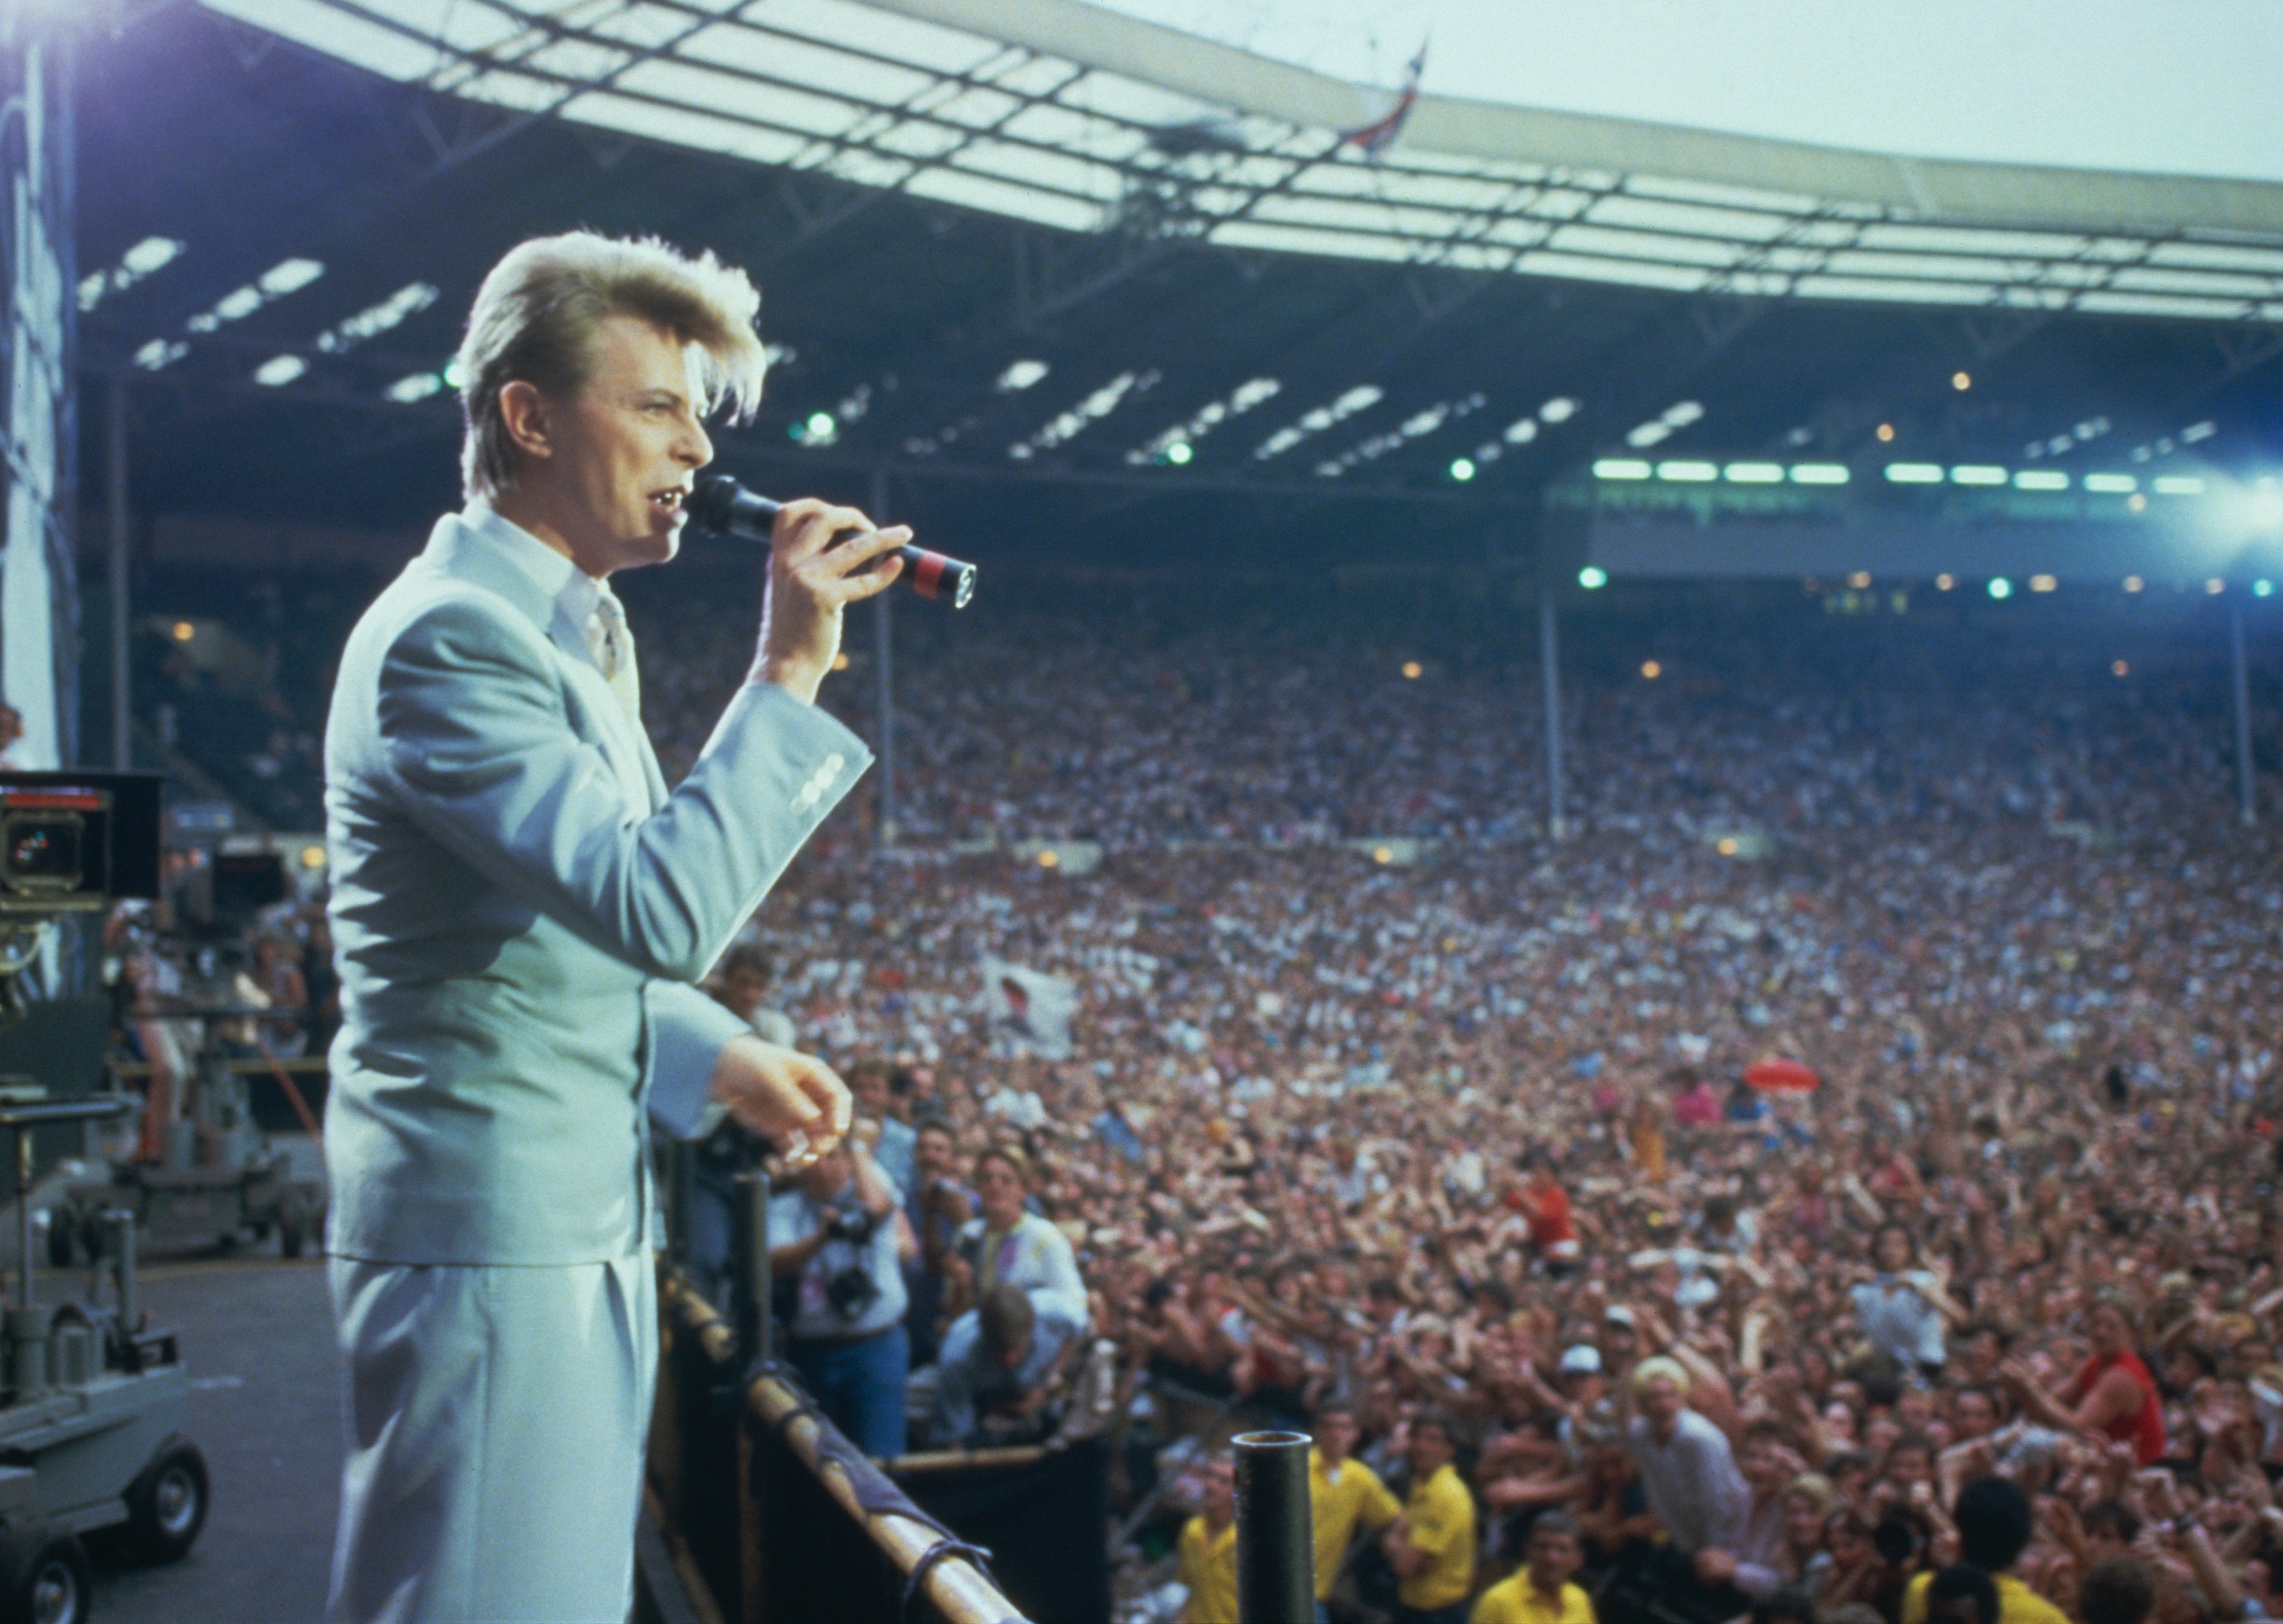 English singer David Bowie performing at the Live Aid concert at Wembley Stadium in London, 13th July 1985. The concert raised funds for famine relief in Ethiopia. (Photo by Georges De Keerle/Getty Images) (Georges De Keerle—Getty Images)